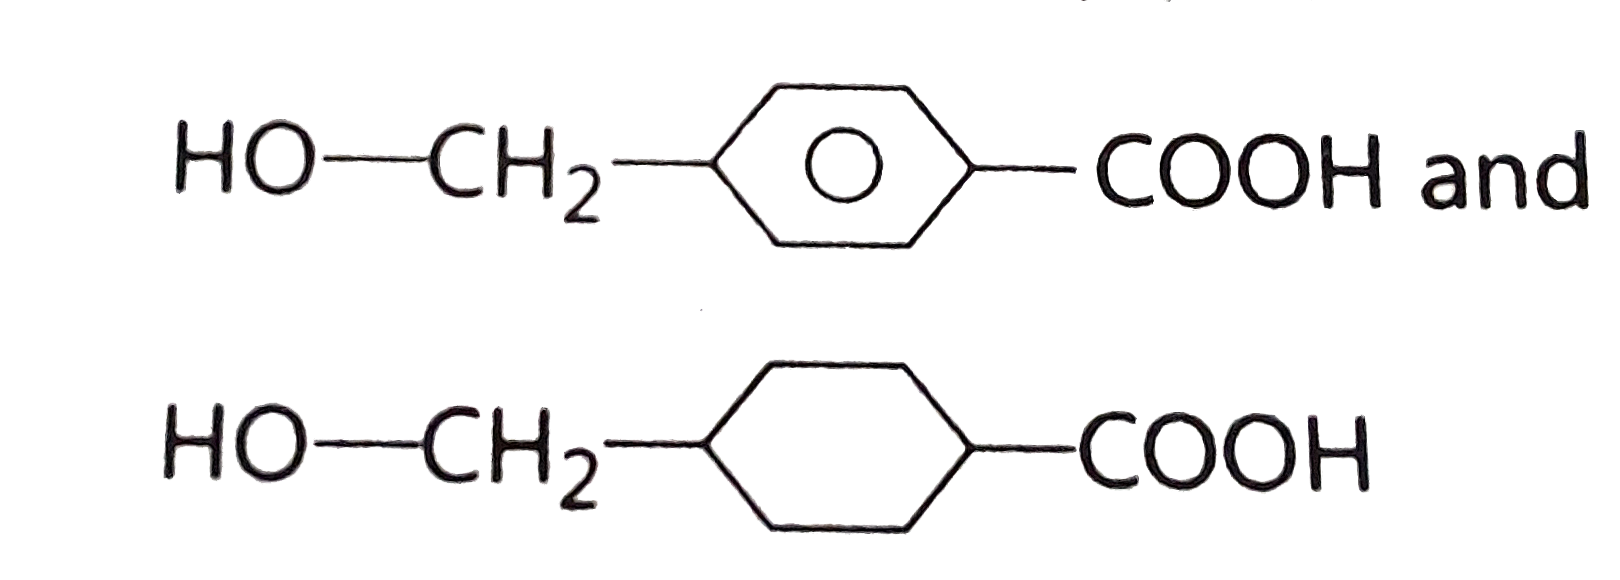 Polymer obtained by polymerisation of monomers